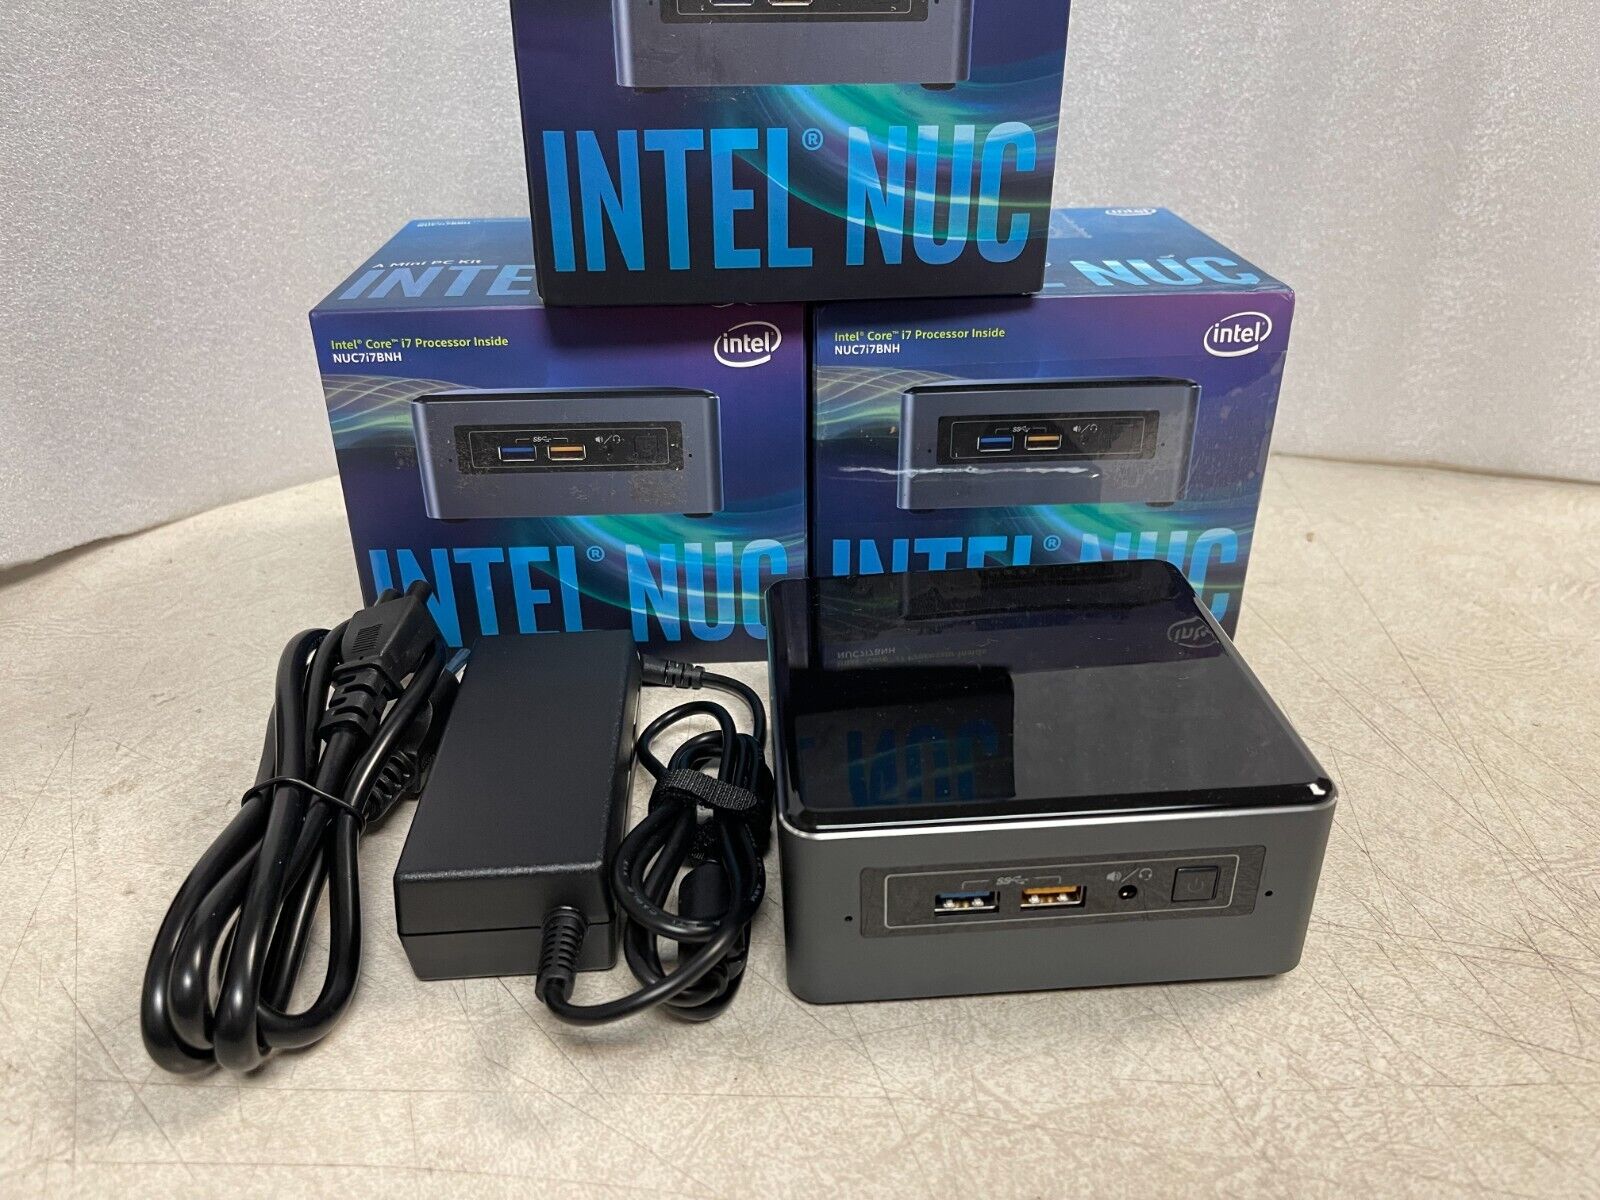 Intel NUC7I7BNH i7-7567U, 32GB Ram, New *1TB M.2 SSD, Win 11 -MINT WORKING COND.